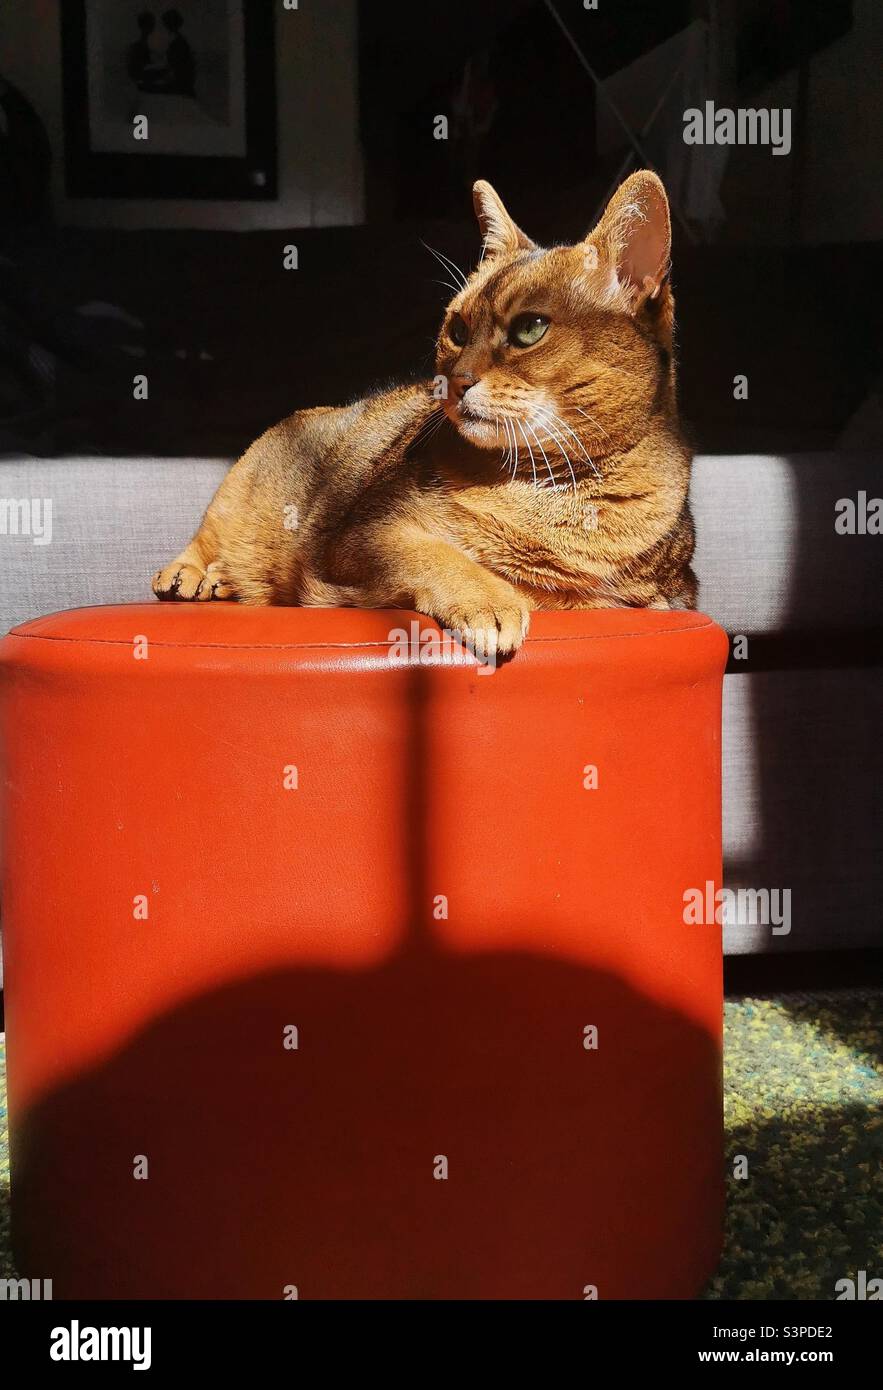 Abyssinian cat lying on red footstool Stock Photo